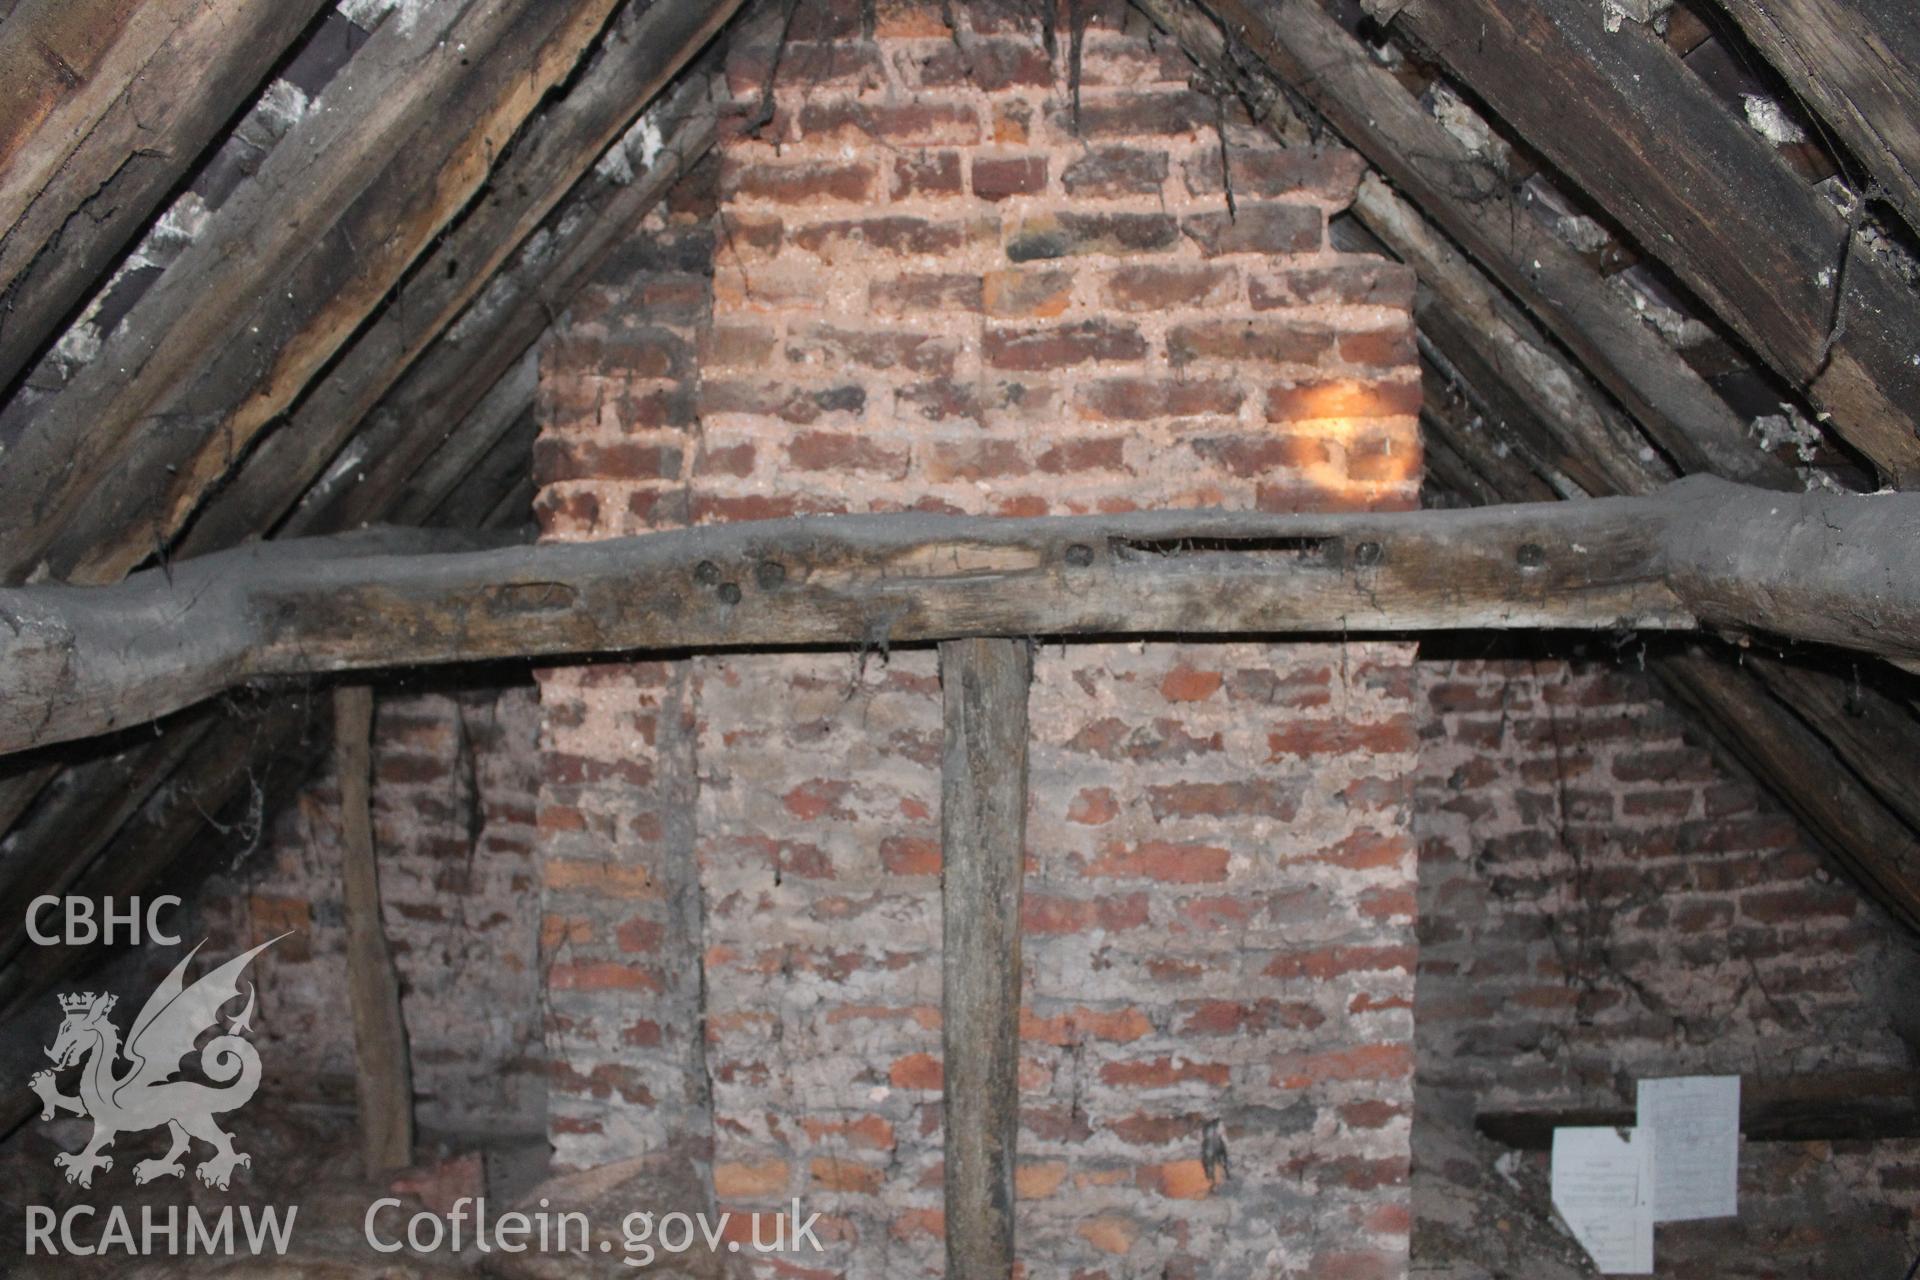 Colour photograph showing detail of timber frame, interior of roof and red brick chimney stack and wall in attic at 5 to 7 Mwrog Street, Ruthin. Photographed during survey conducted by Geoff Ward on 30th May 2014.